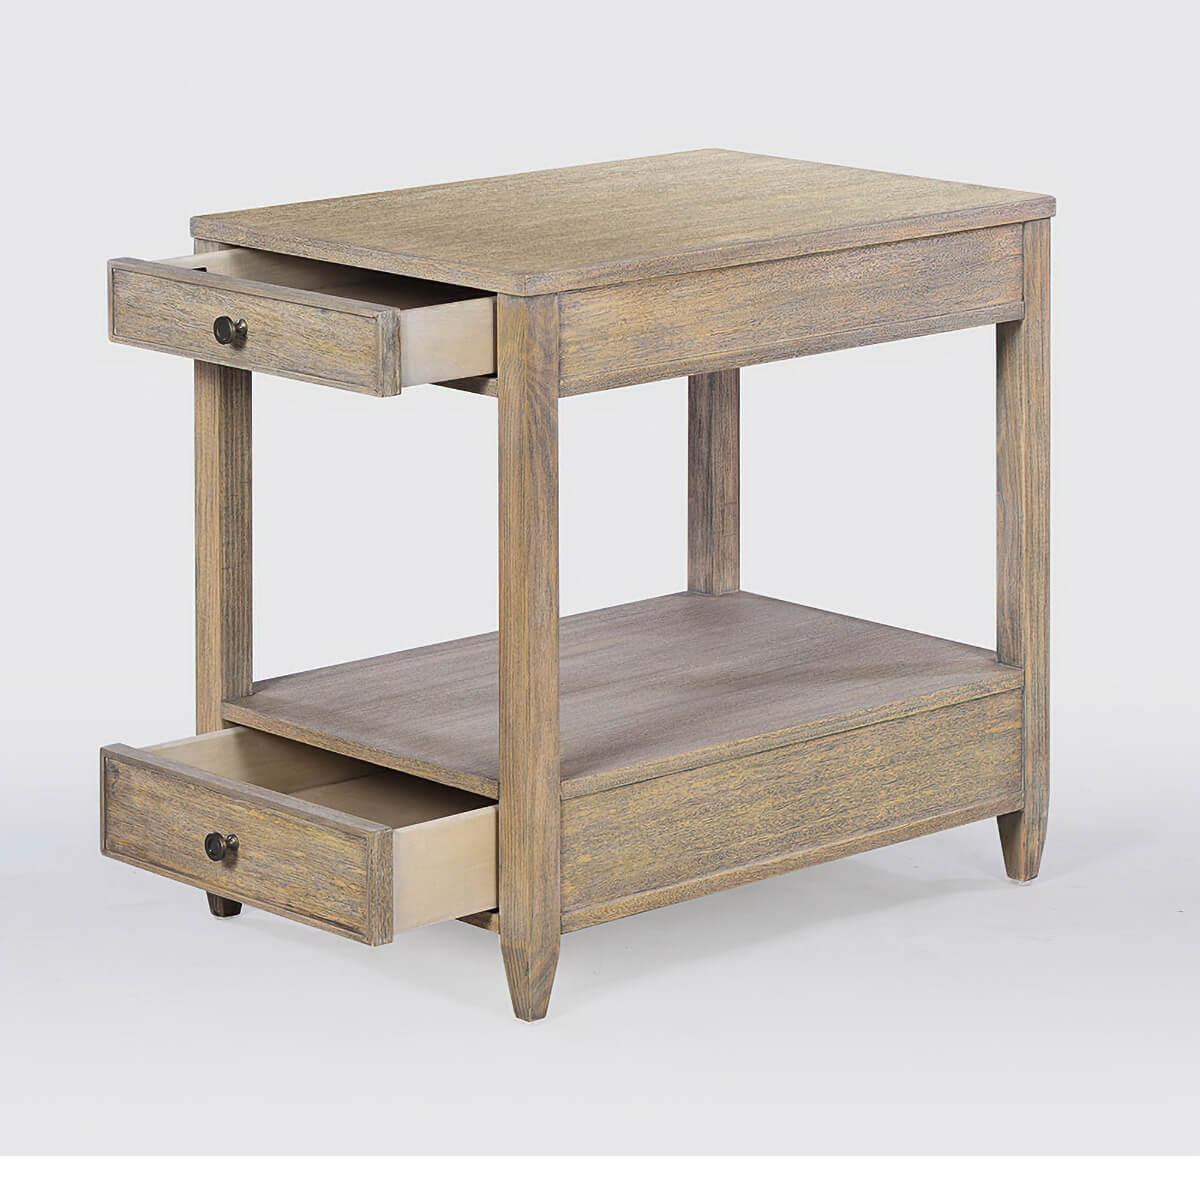 Classic narrow rectangle side table with two drawers, brass hardware, and tapered feet, with a “rustic” warm walnut finish with subtle visual distressing and hand-rubbed finish.

Dimensions: 18